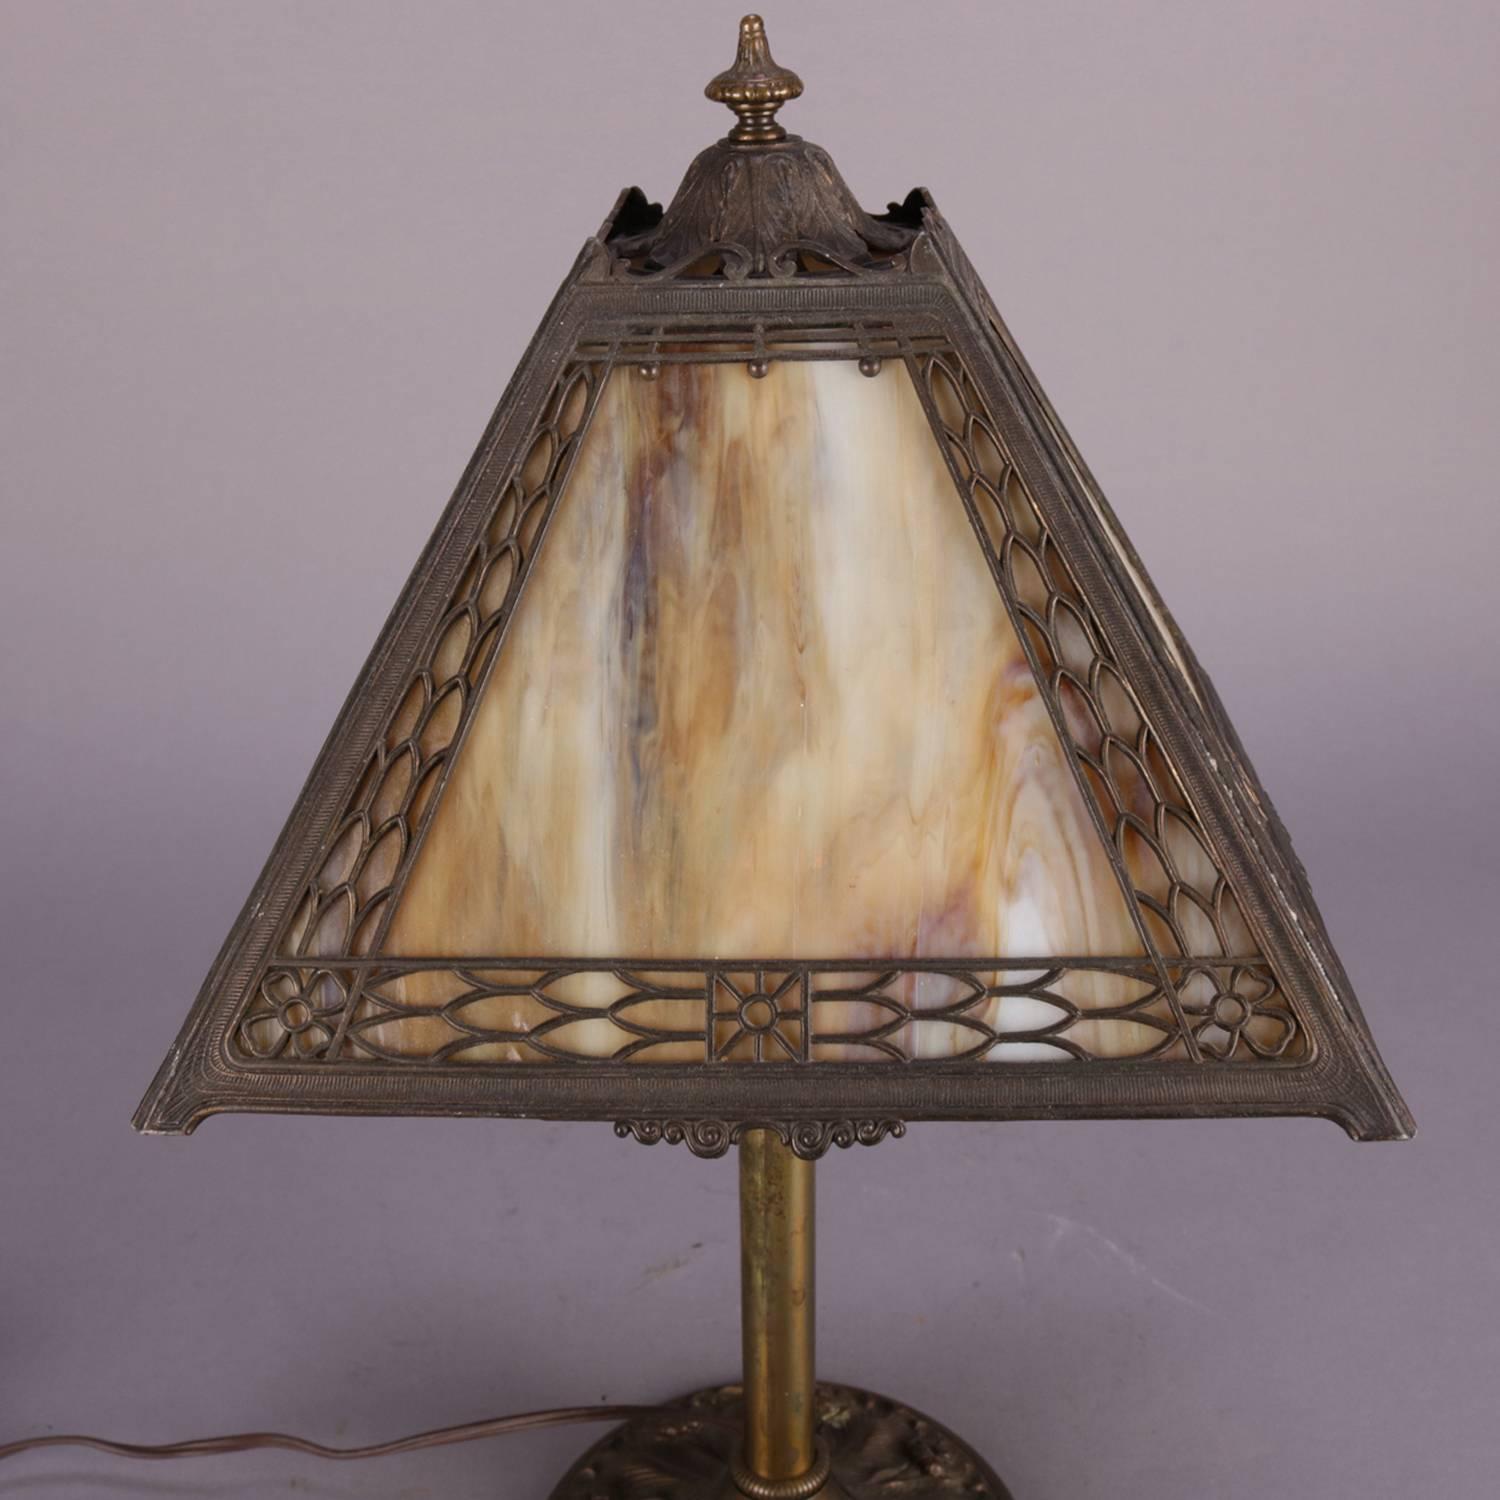 Antique Arts & Crafts Miller petite table lamp features cast base with high relief foliate and floral design, four panel shade with pierced filigree shade frame with foliate border and central stylized flower and housing four slag glass panels,